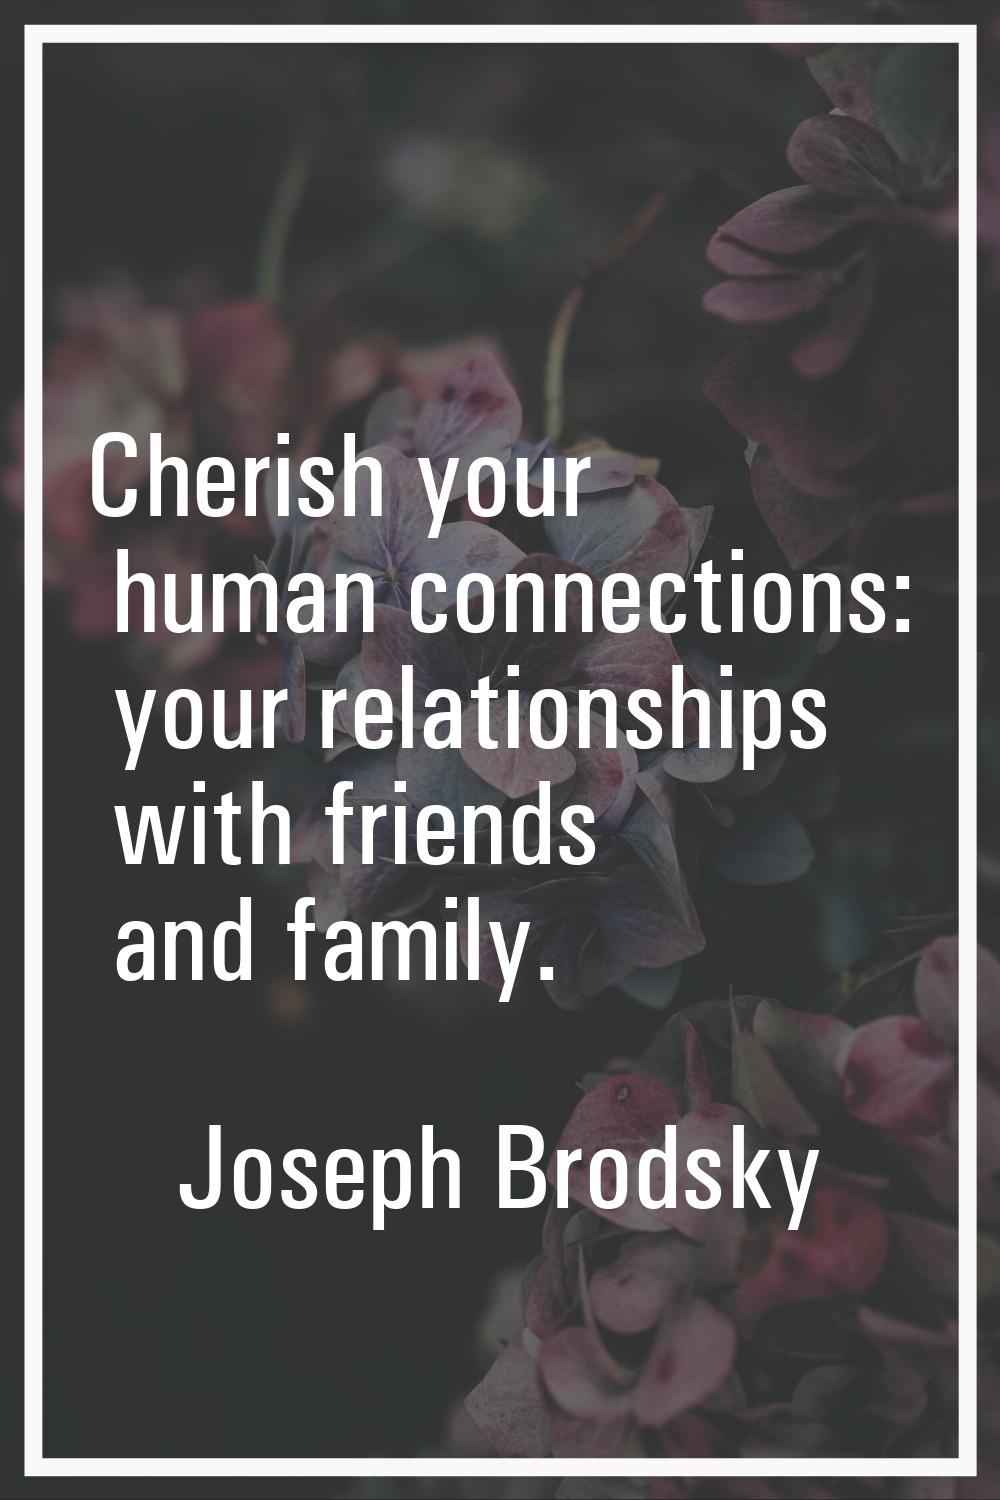 Cherish your human connections: your relationships with friends and family.